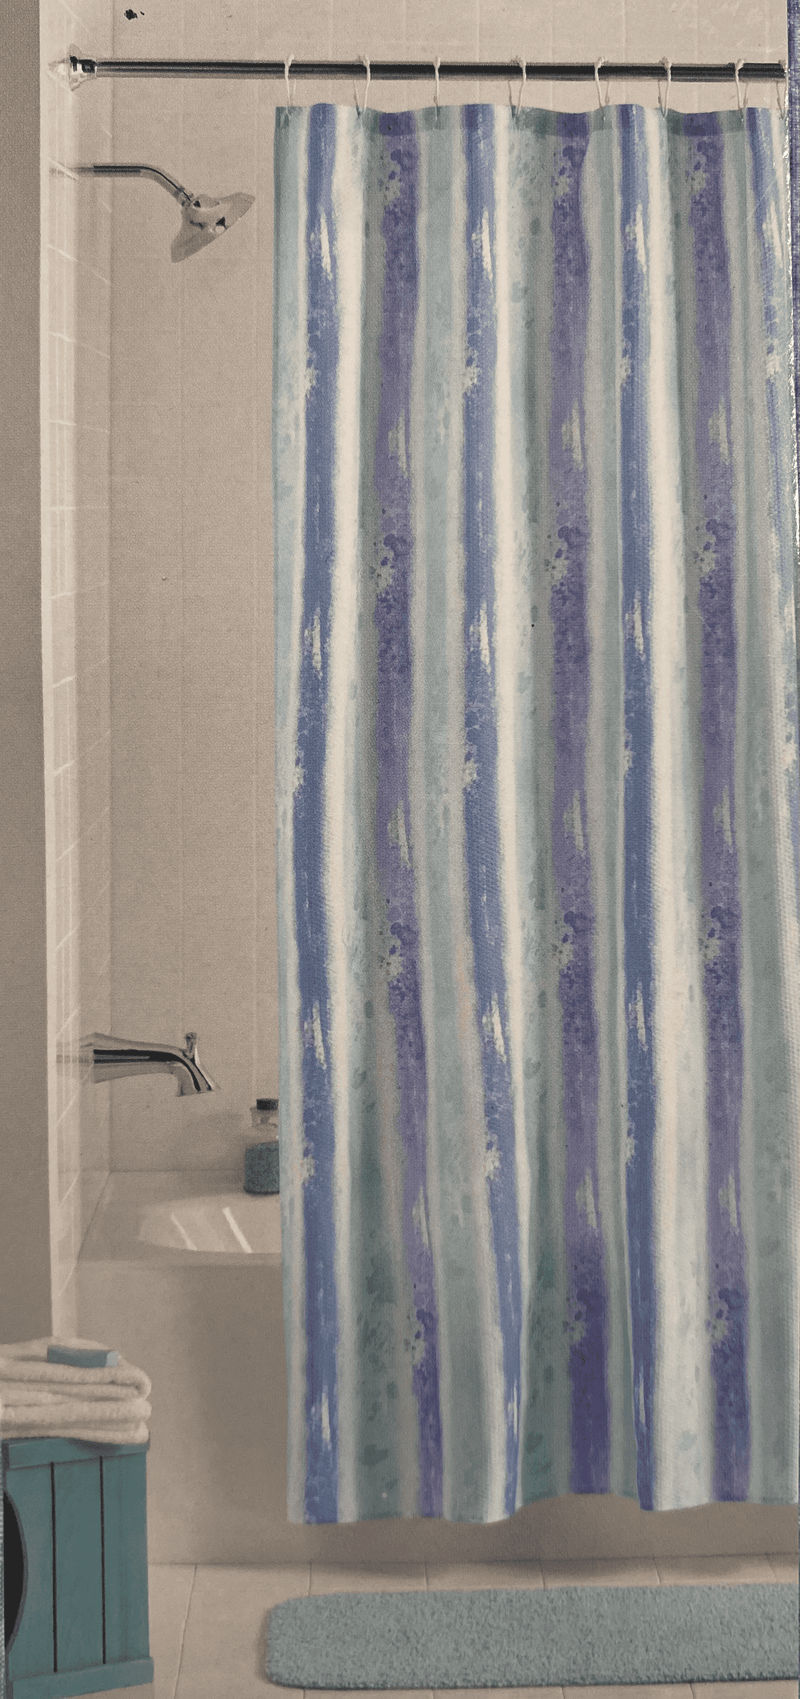 VCNY Home- Fabric Shower Curtain (70in x 72in).